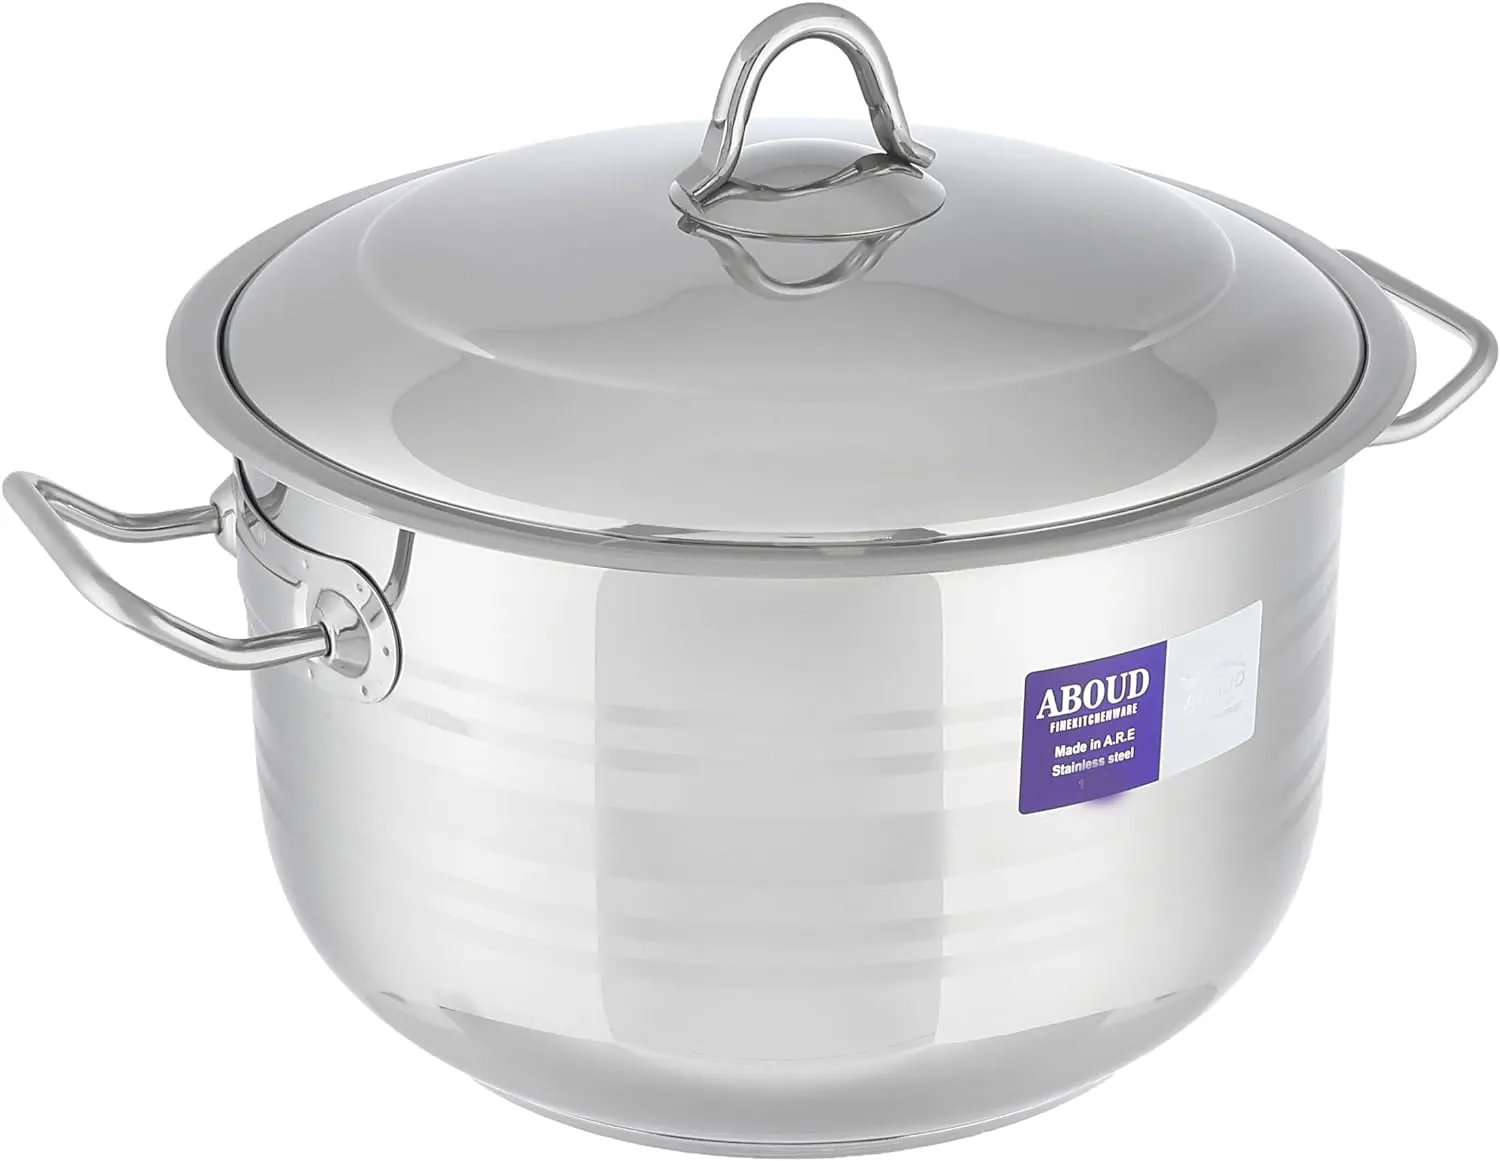 Aboud Striped stainless steel pot , size 28, silver